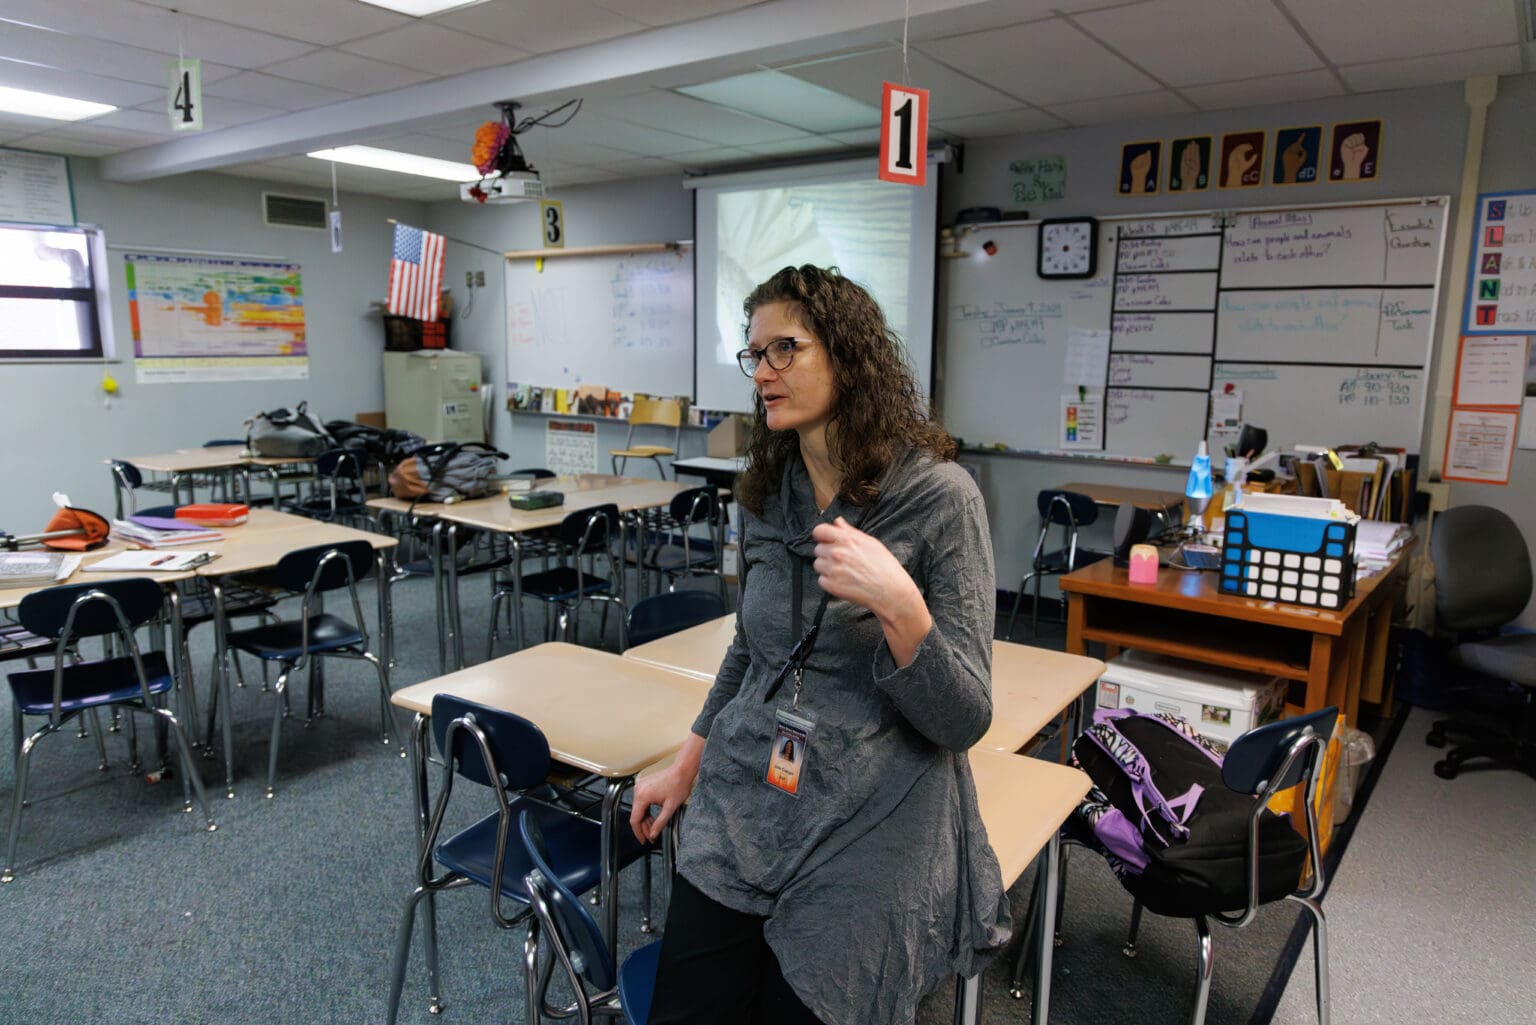 Sixth-grade teacher Julie Creager mimics fanning herself as she describes the school-year heat waves as she sits on one of the many empty student desks in her class.